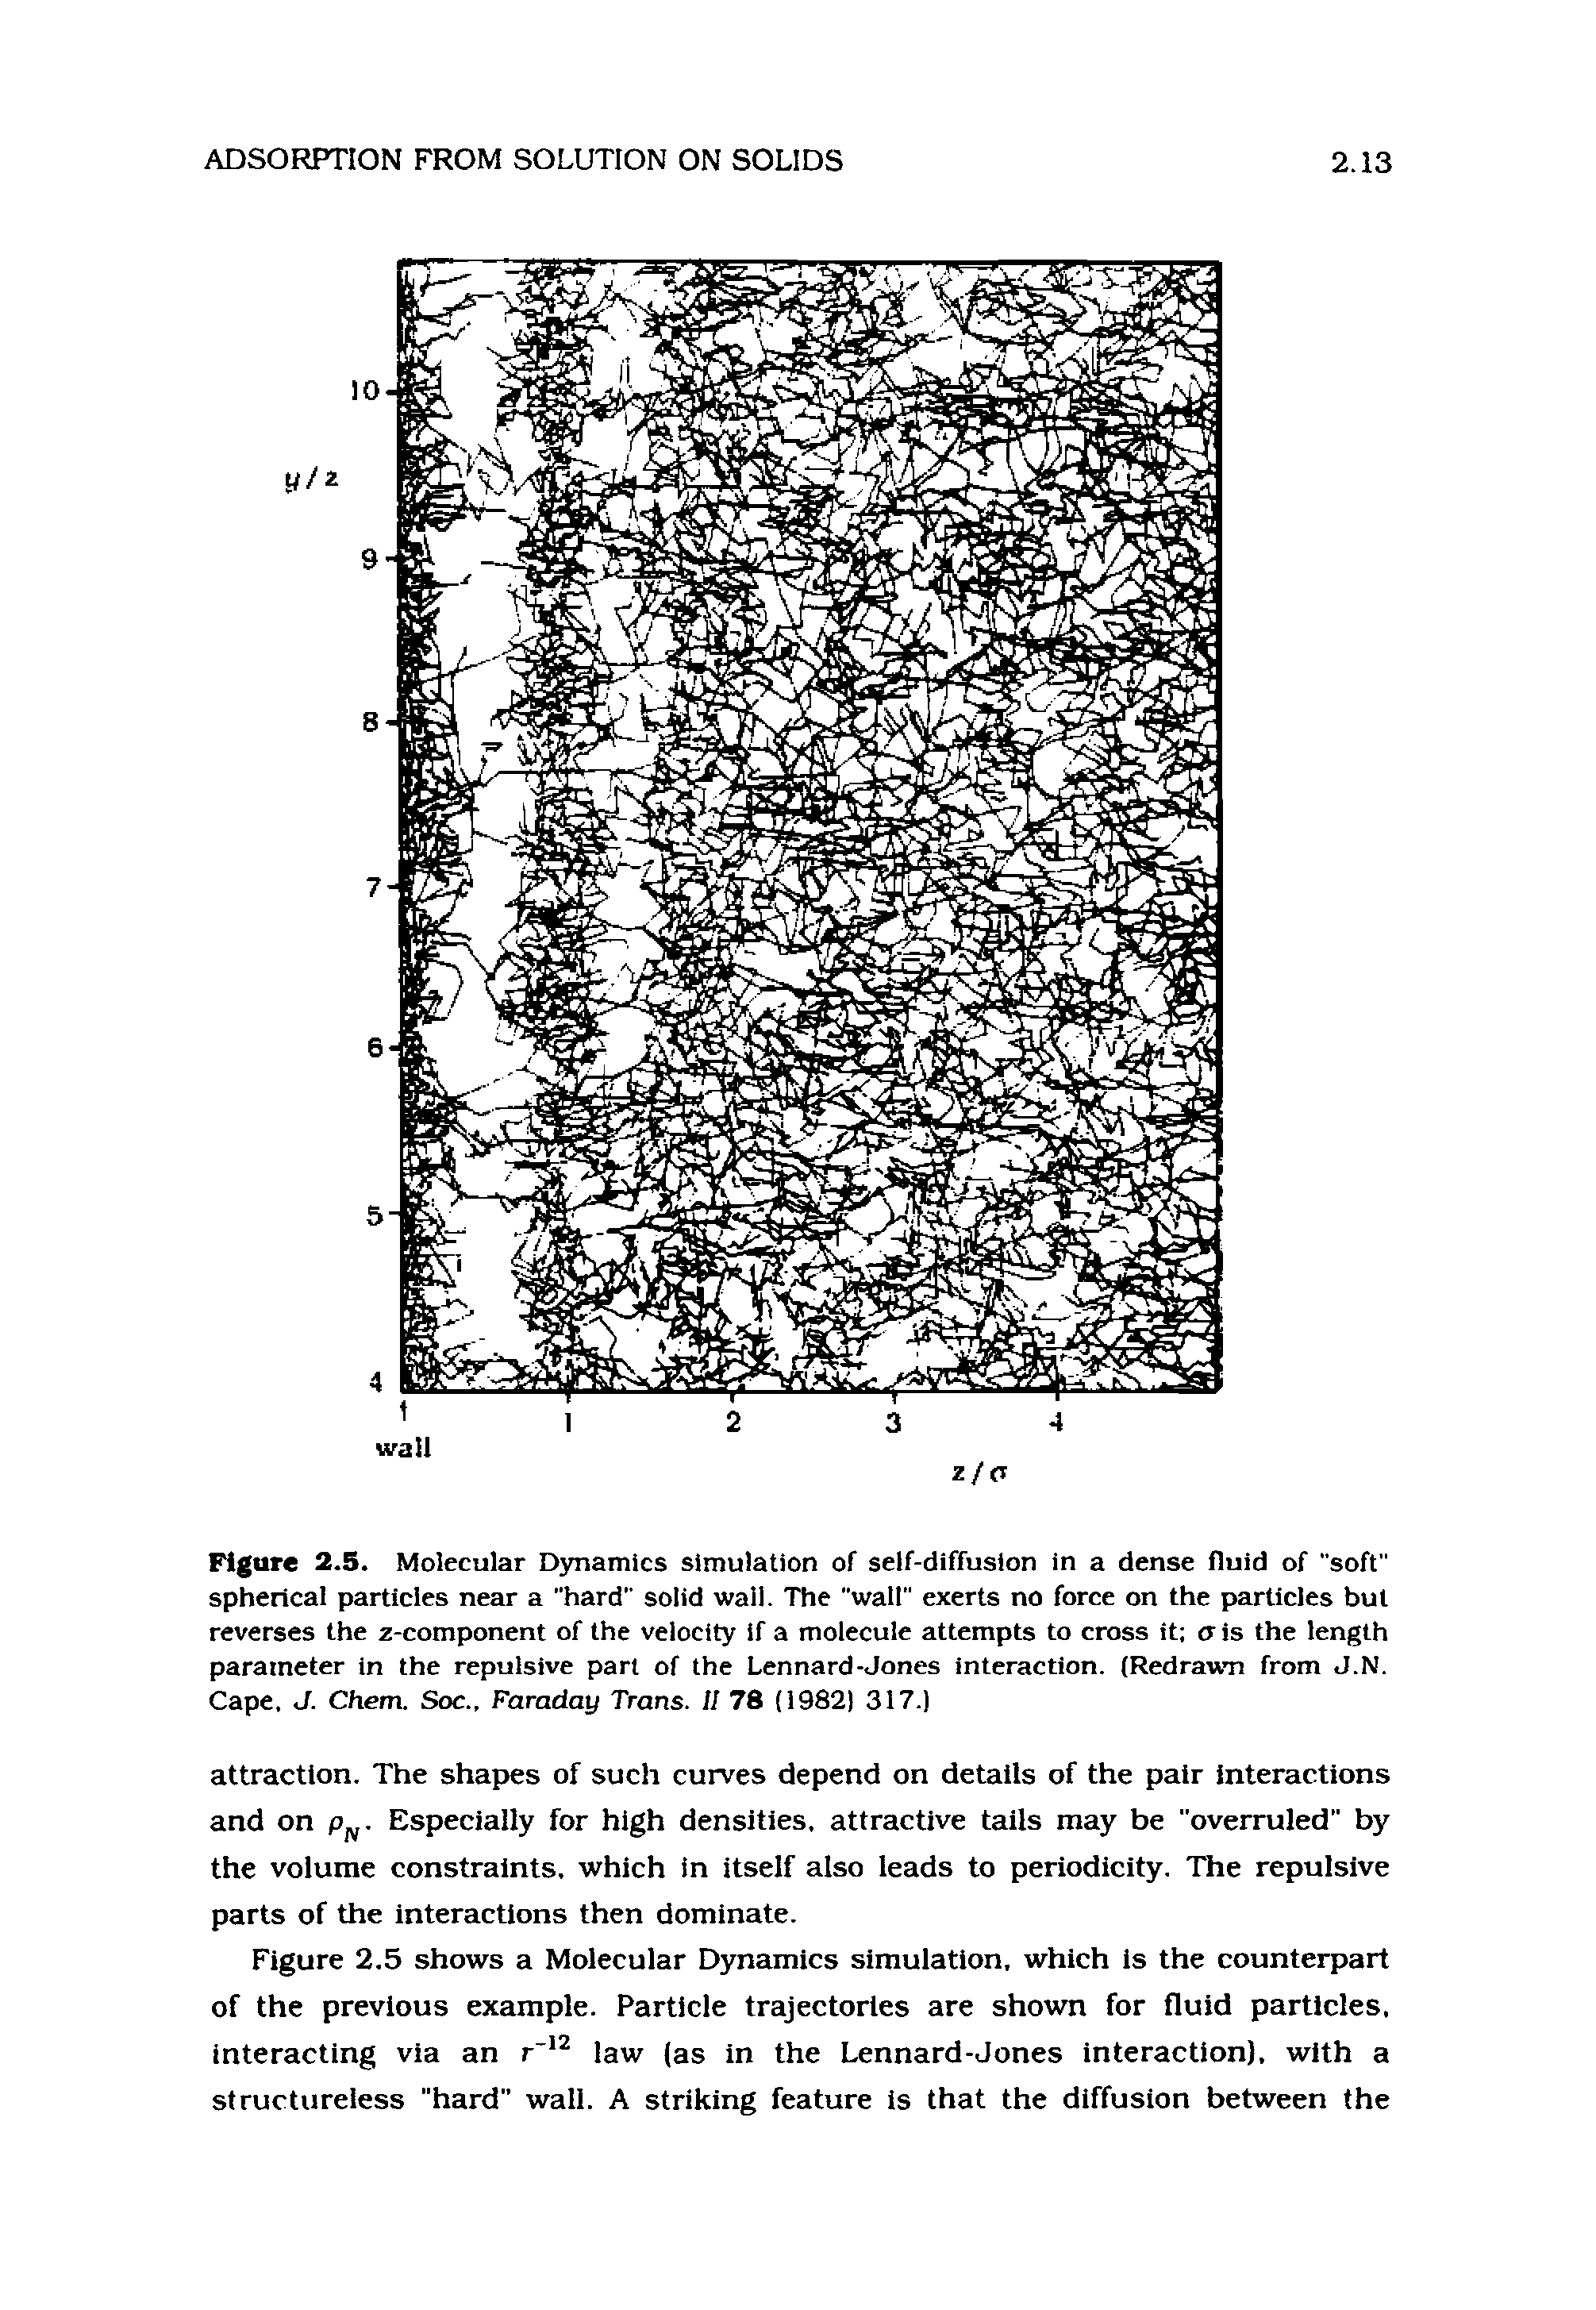 Figure 2.5. Molecular D)oiainics simulation of self-diffusion in a dense fluid of "soft" spherical particles near a "hard" solid wail. The "wall" exerts no force on the particles but reverses the z-component of the velocity if a molecule attempts to cross it a is the length parameter in the repulsive part of the Lennard-Jones interaction. (Redrawm from J.N. Cape. J. Chem. Soc., Faraday Trans. II 78 (1982) 317.)...